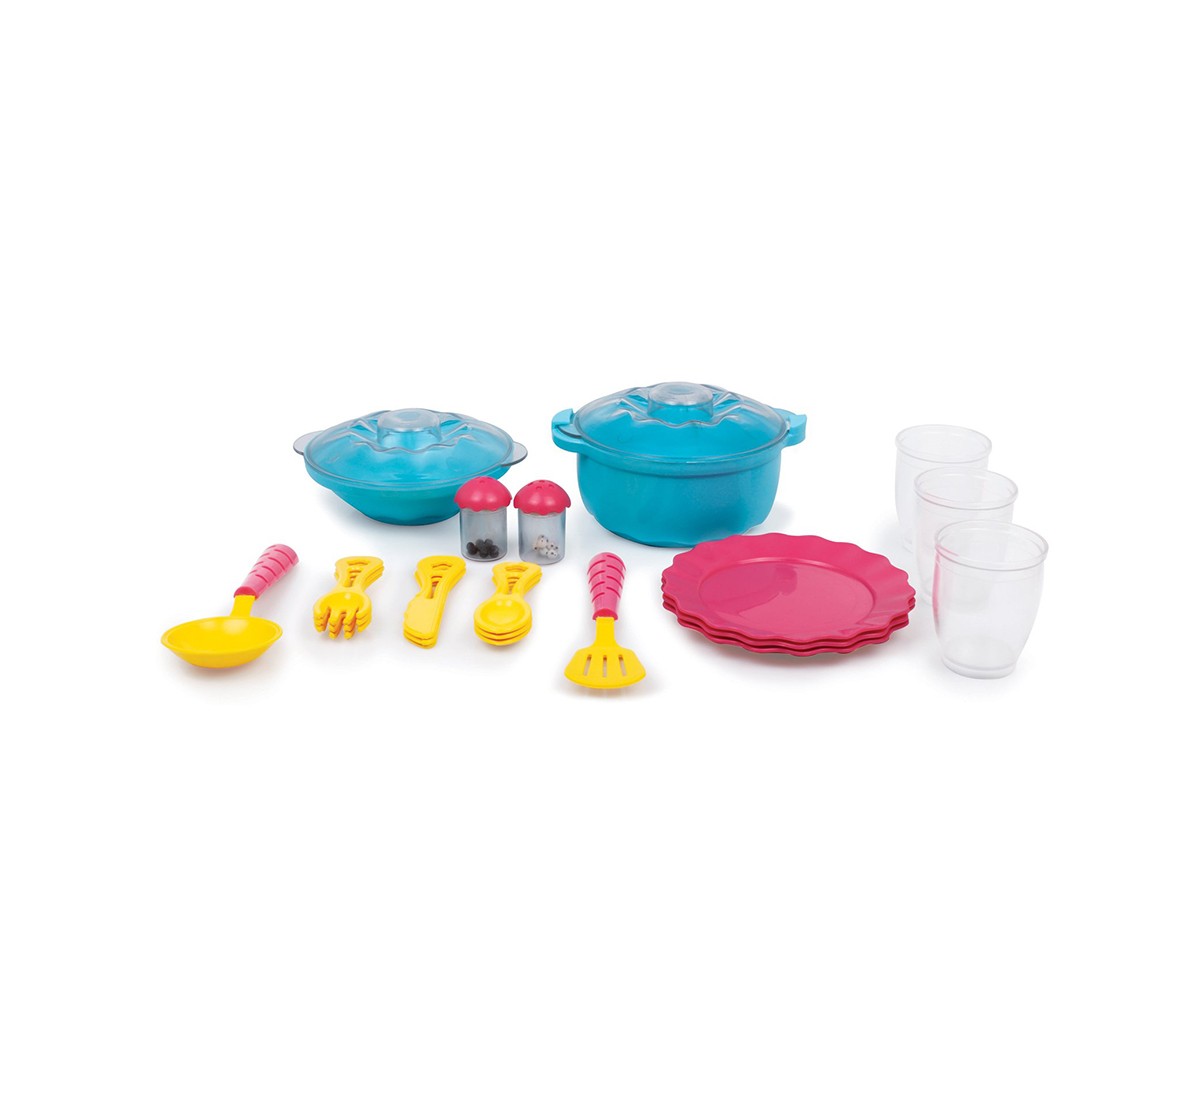 Giggles Dinnerware Set - 23 Pieces Kitchen Sets & Appliances for Kids age 3Y+ 